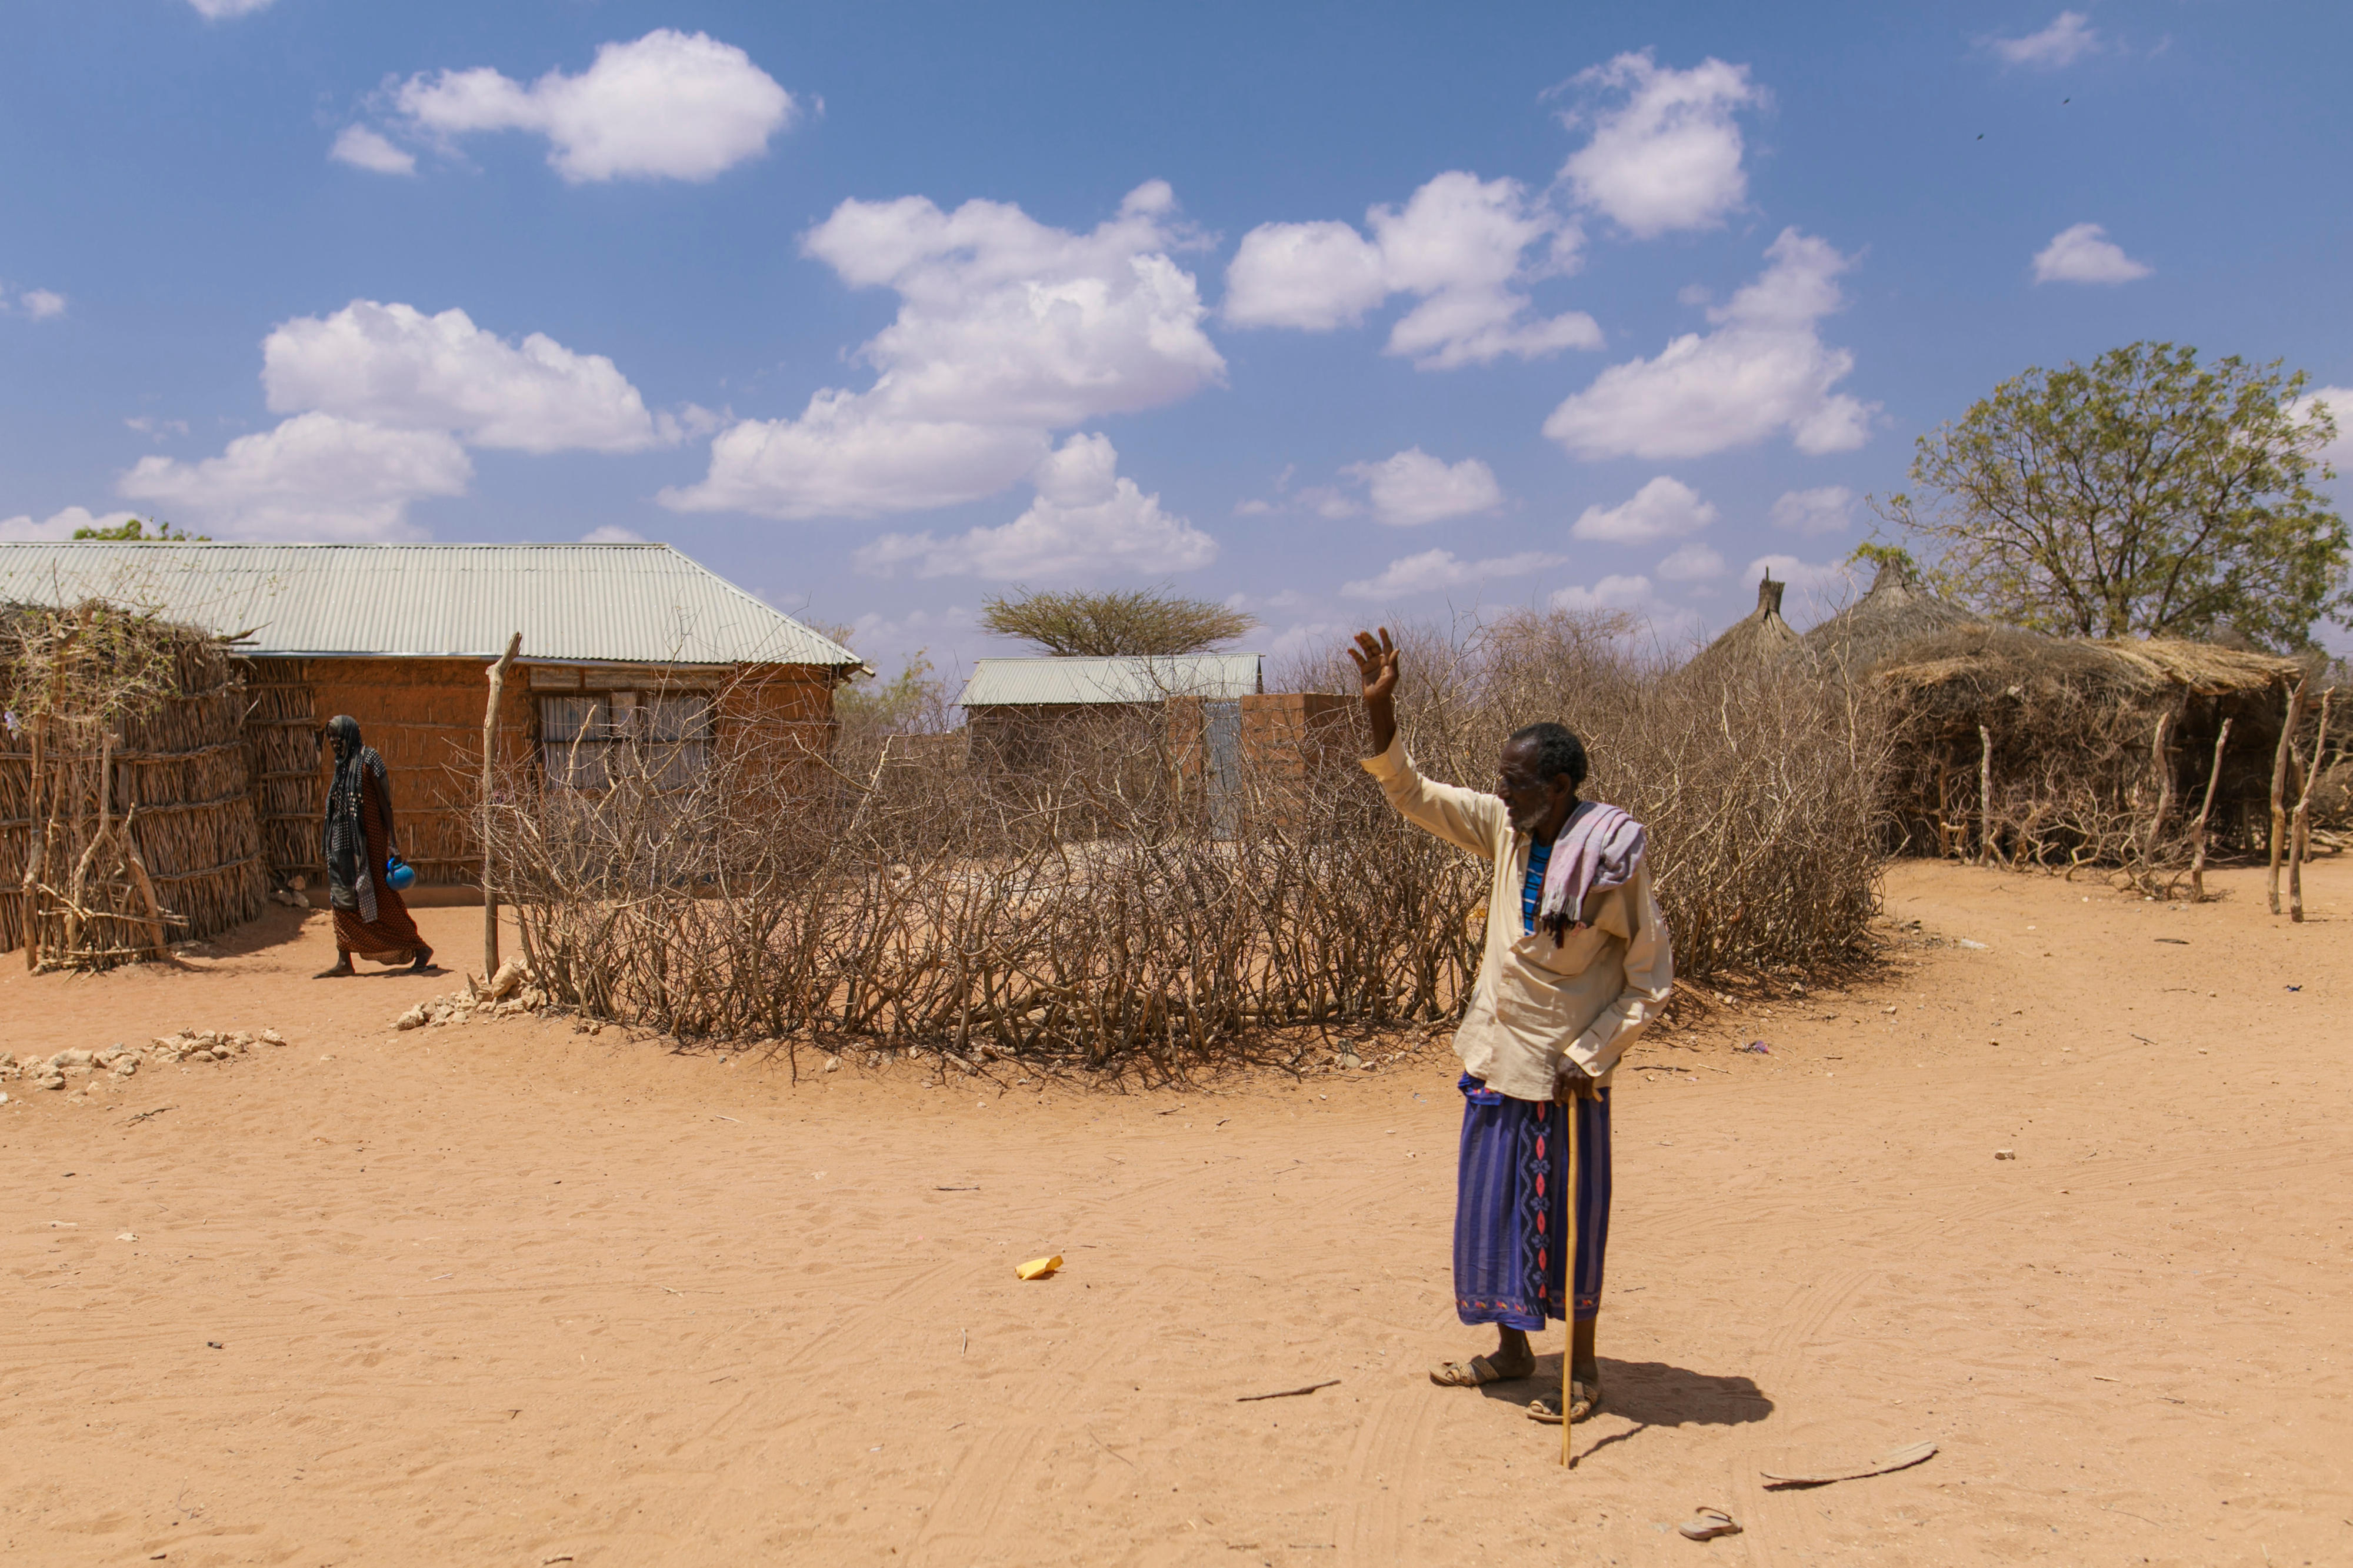 Village in the Somali region of Ethiopia where nomads have settled because of the ongoing drought